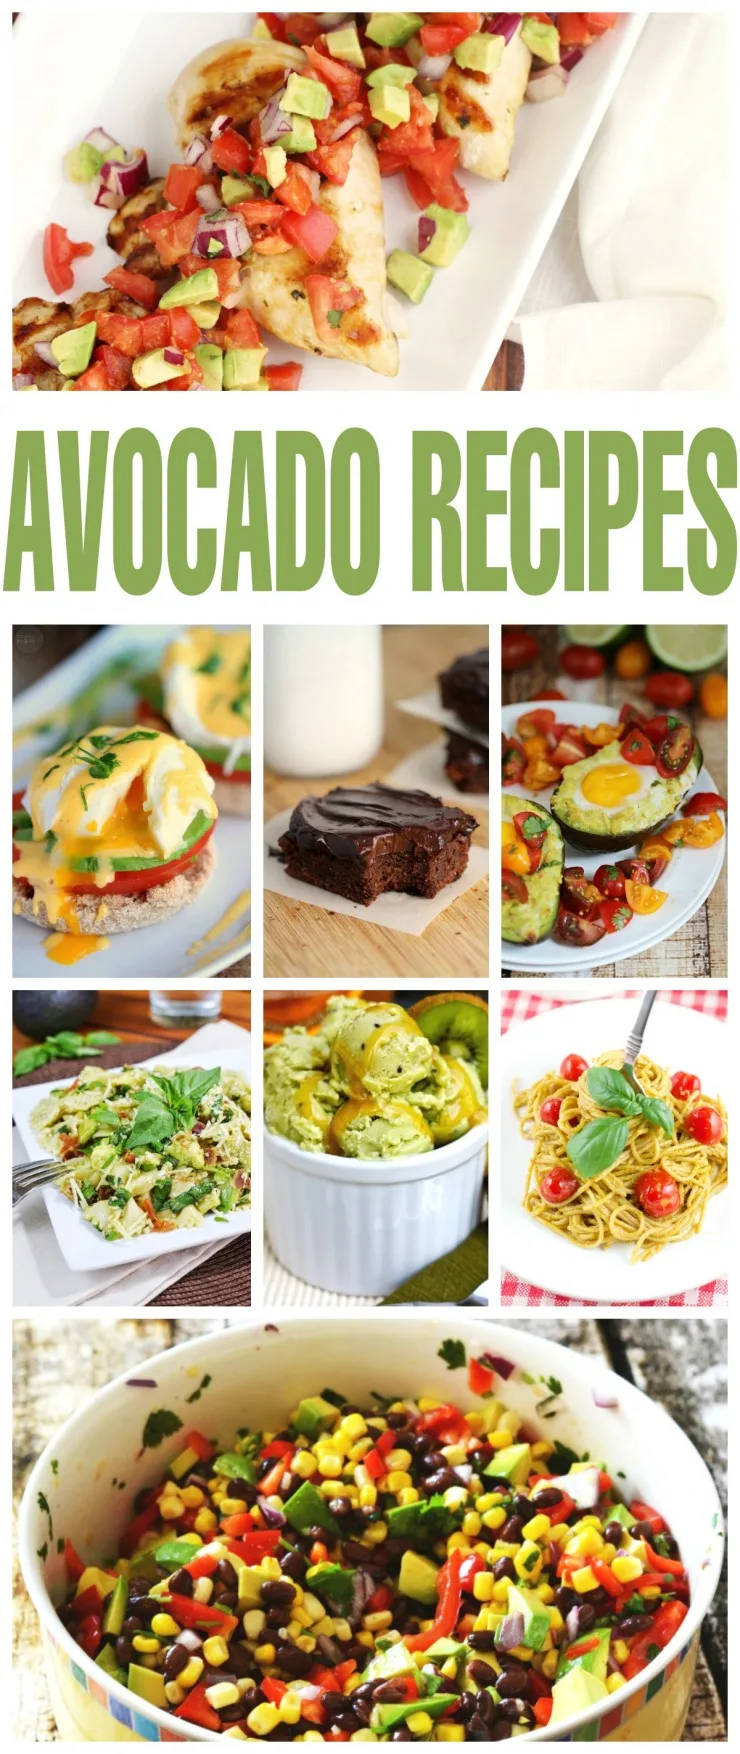 Check out these unforgettable 30+ Unusually Good Avocado Recipes. Ever tried an Avocado milkshake or a fudgy avocado dessert? These are recipes for Avocado lovers!